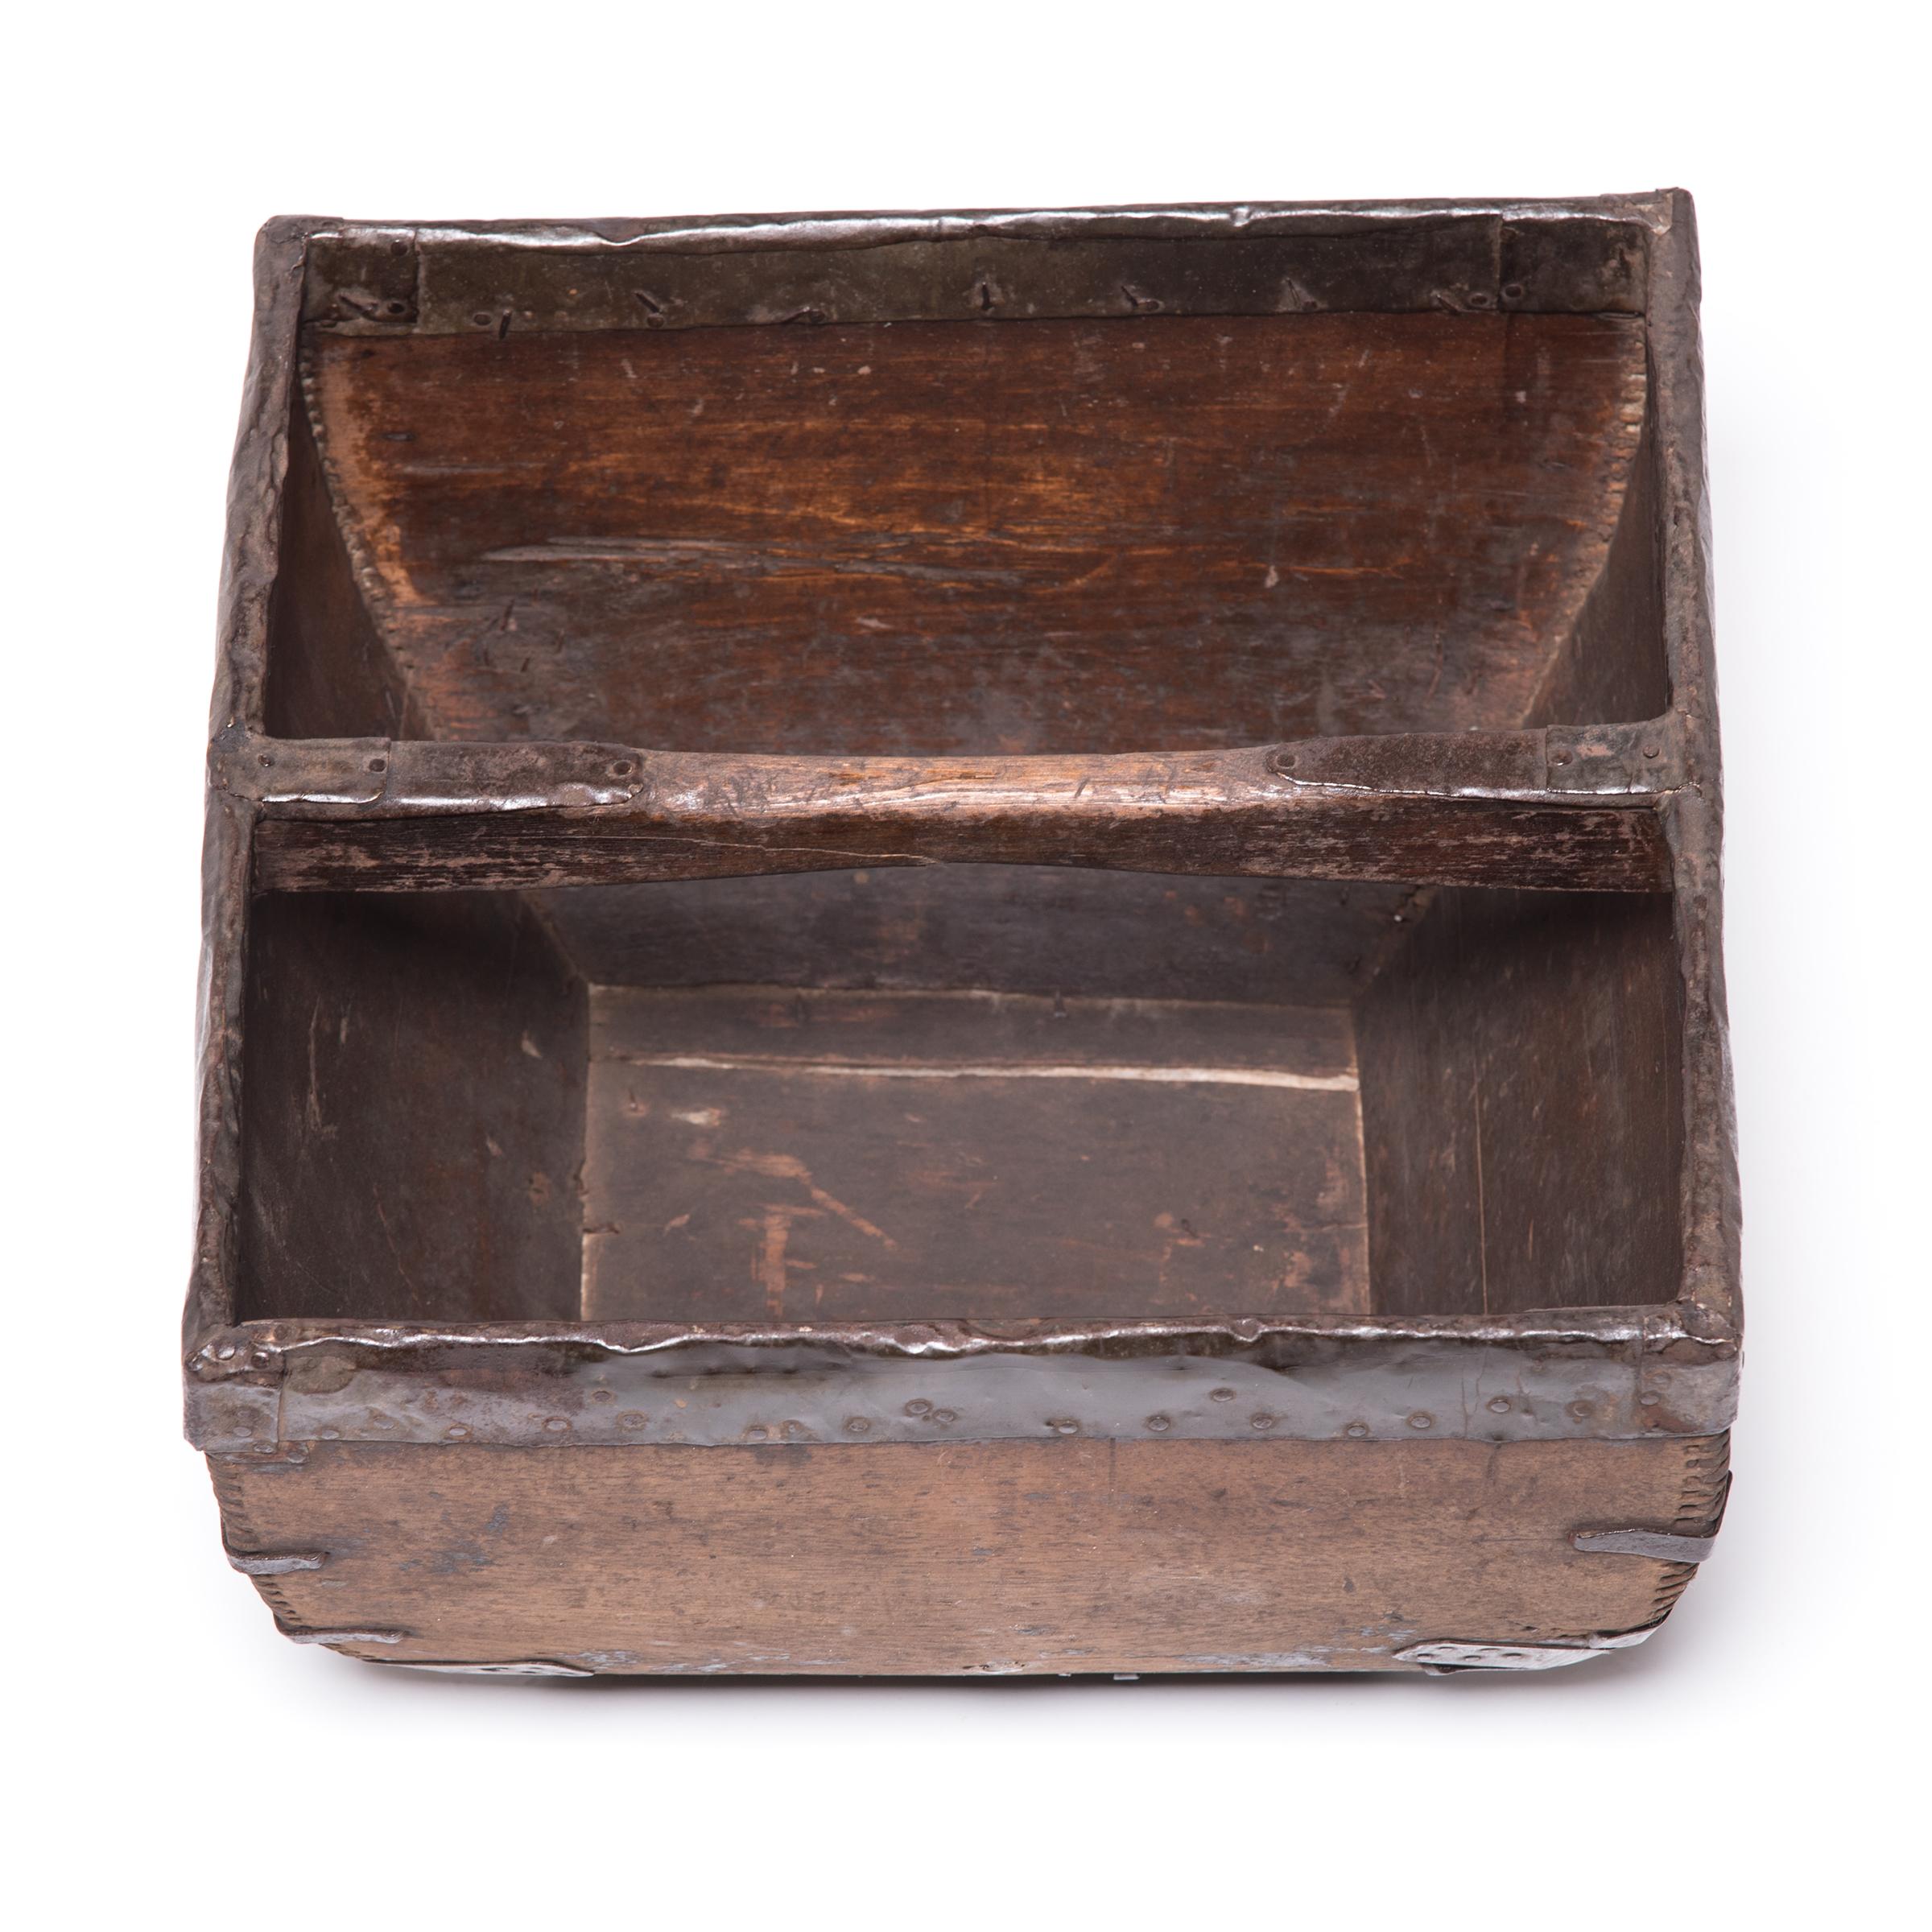 This rustic container was made over a hundred years ago to measure and hold a dou of rice, an ancient Chinese measurement. It is handcrafted with dovetail joints, iron-finished edges, and a hand-arched handle. An unusual amount of care was taken by